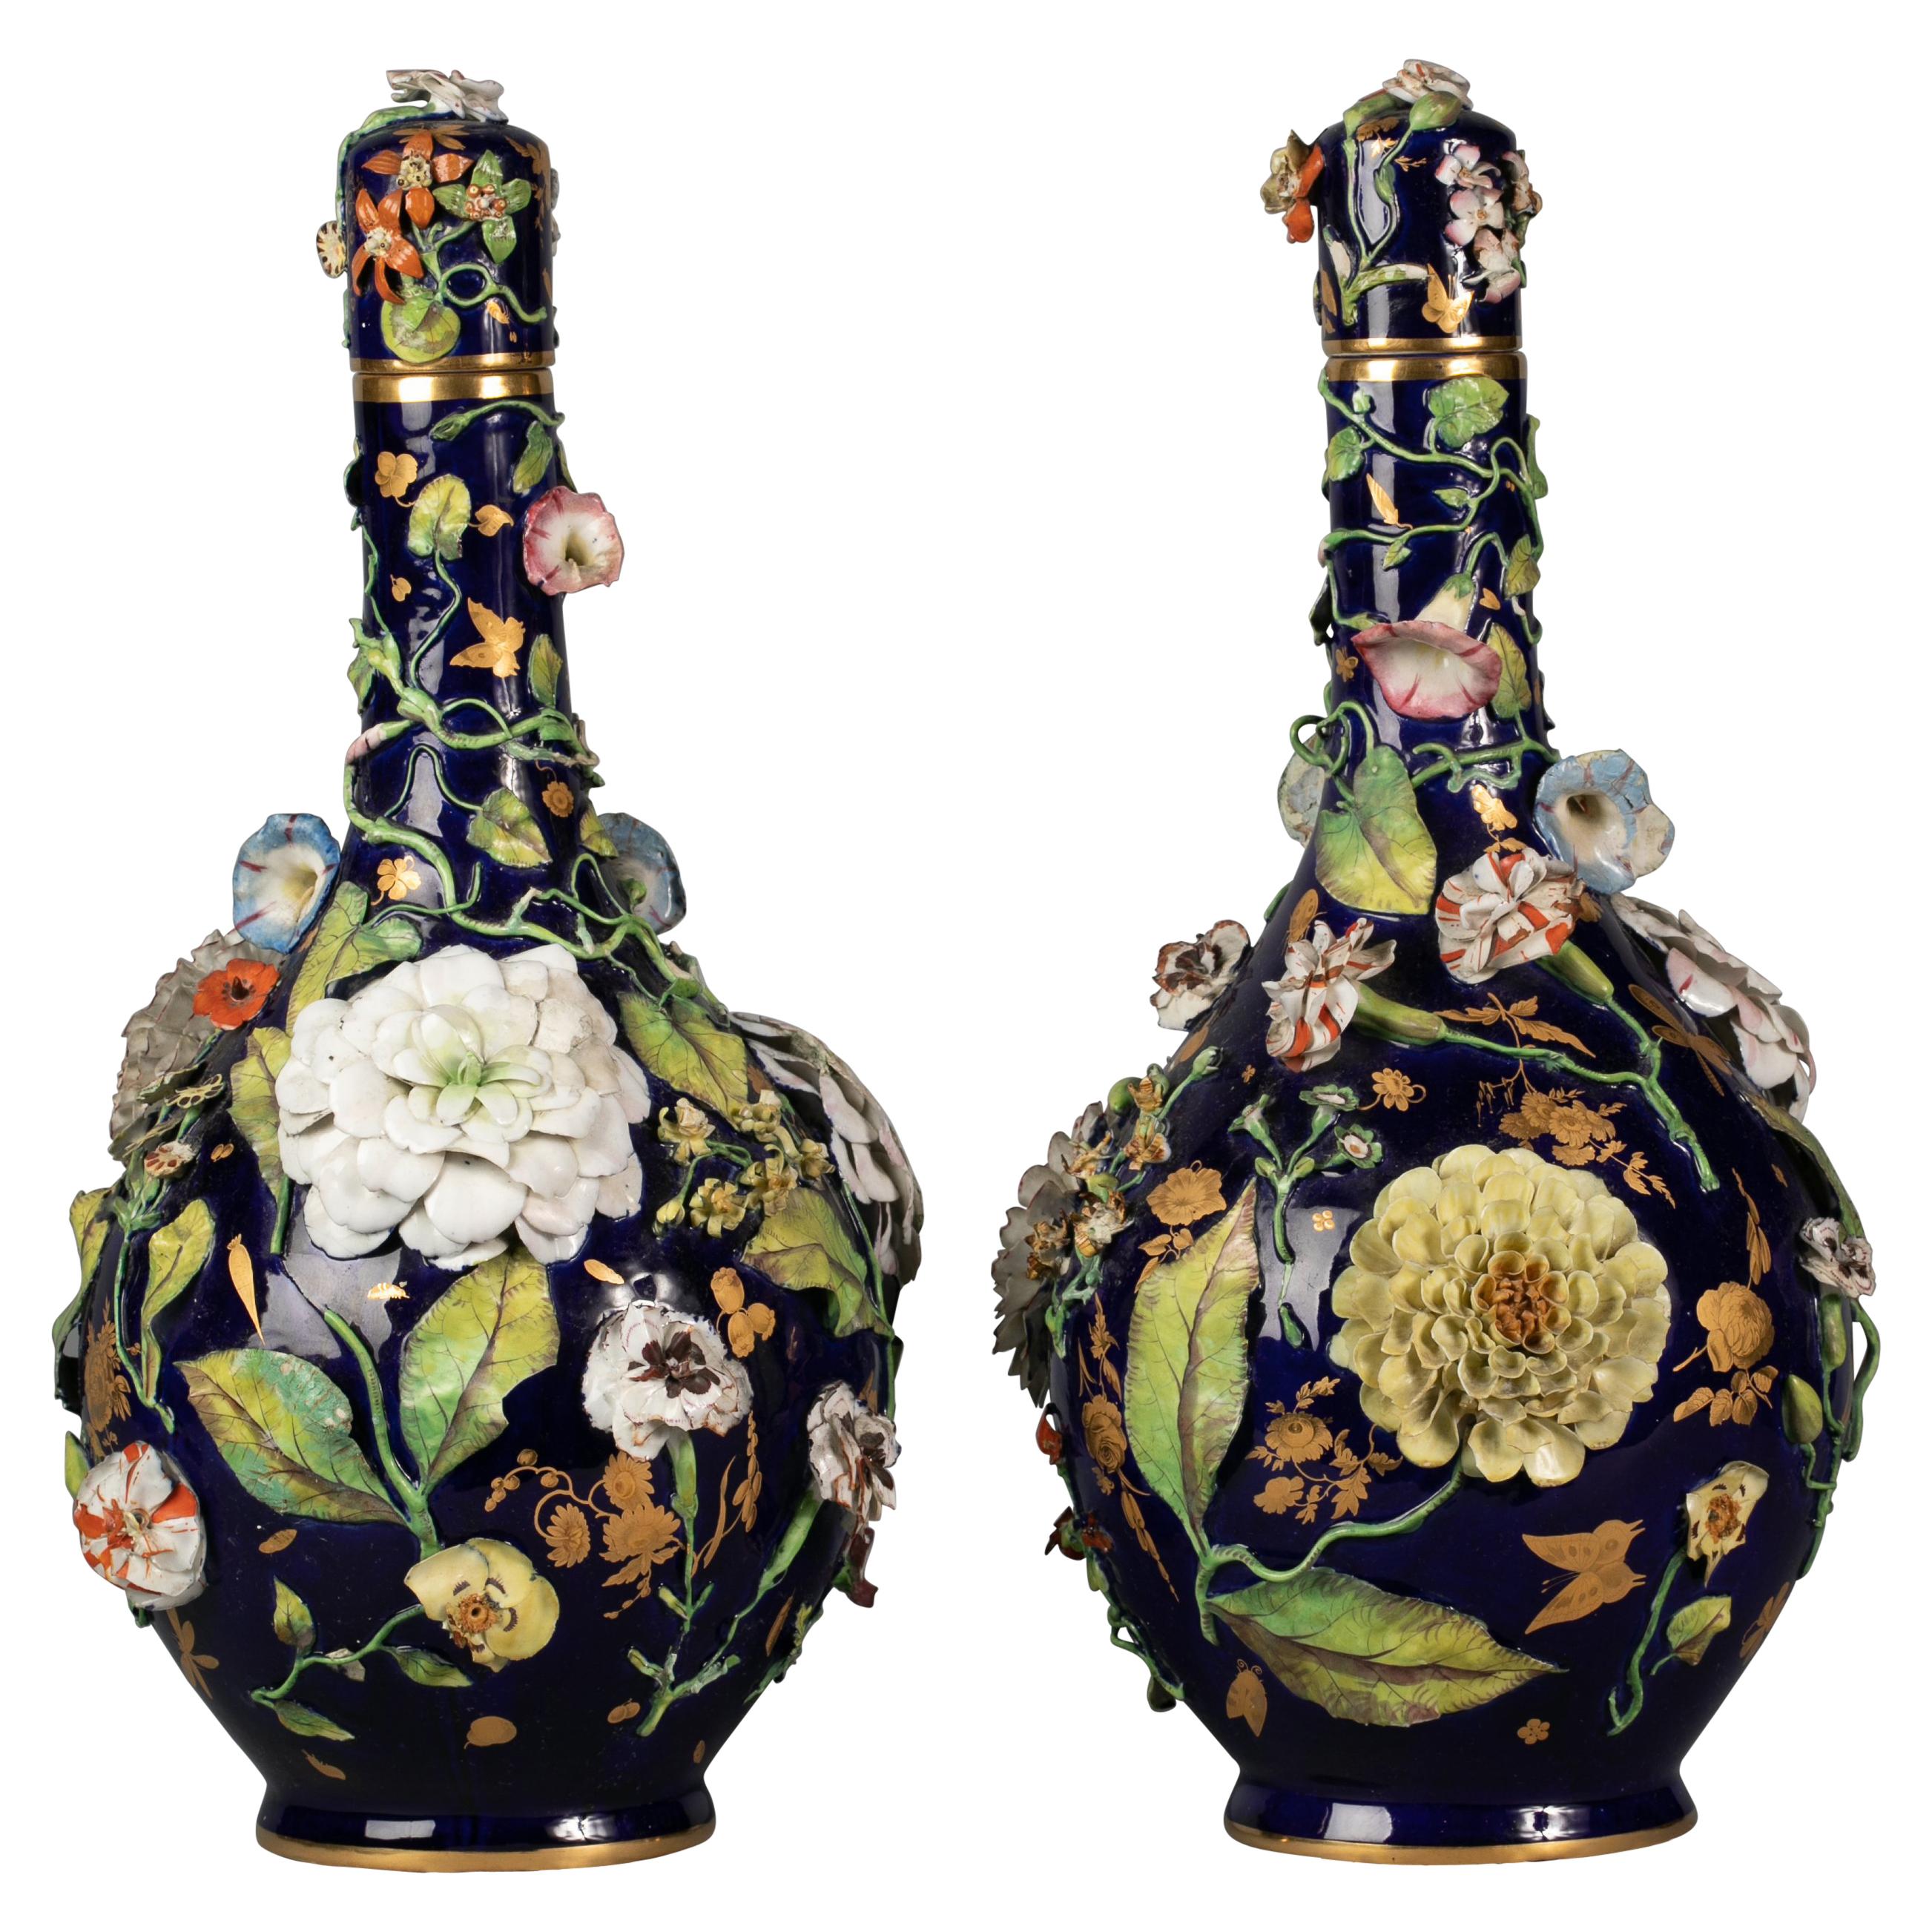 Pair of English Porcelain Floral Covered Vases, circa 1840